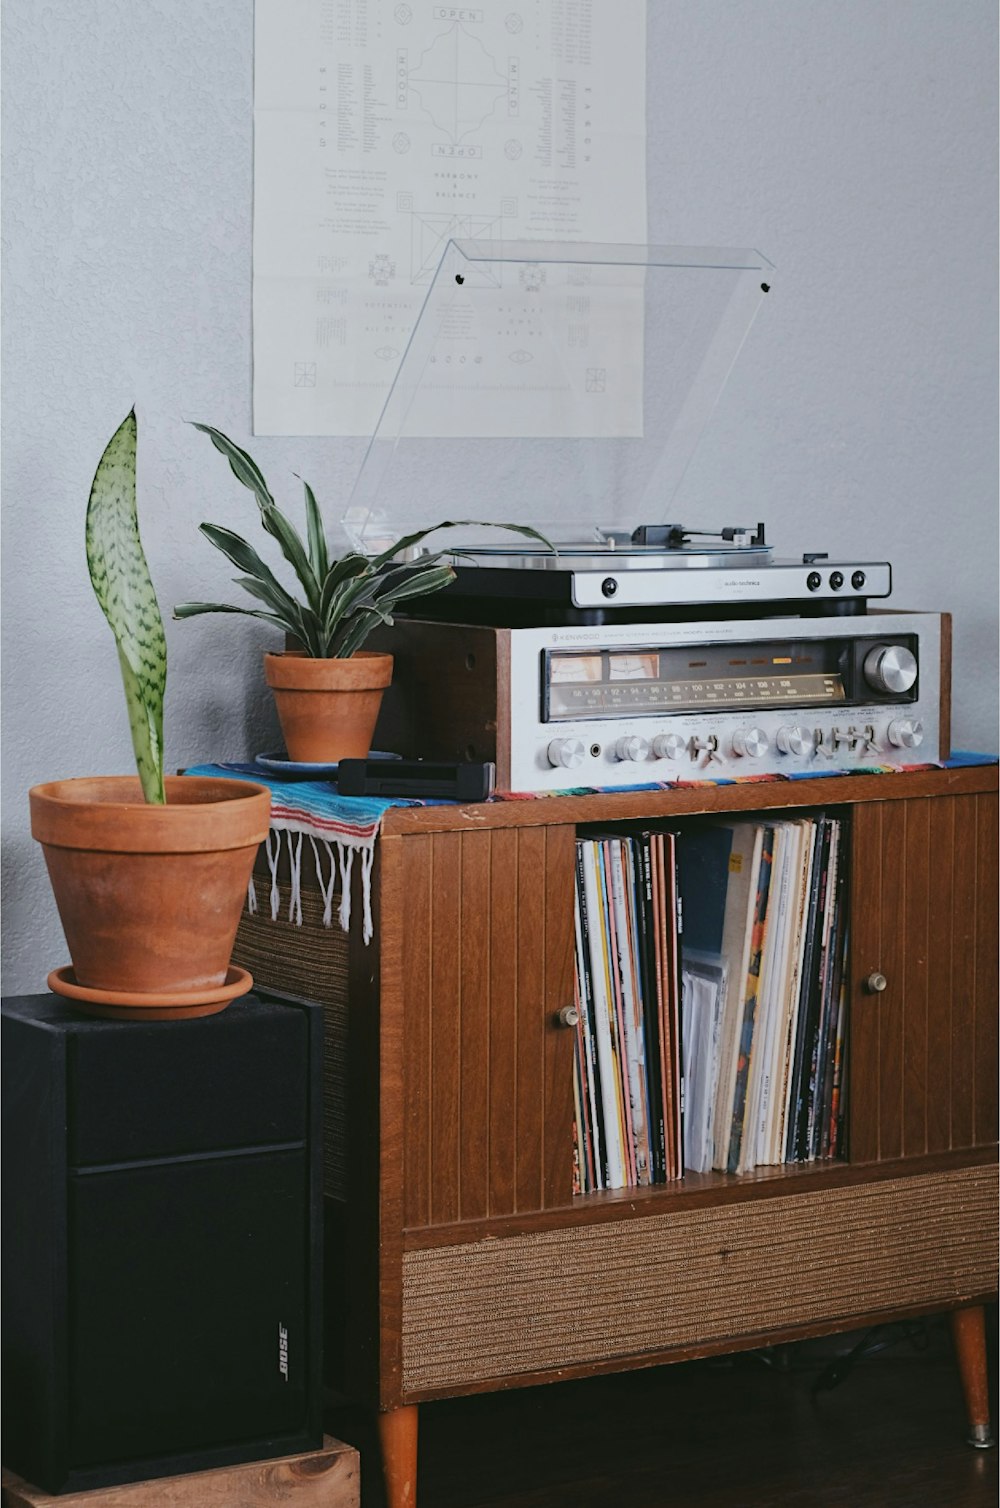 gray radio on brown wooden cabinet